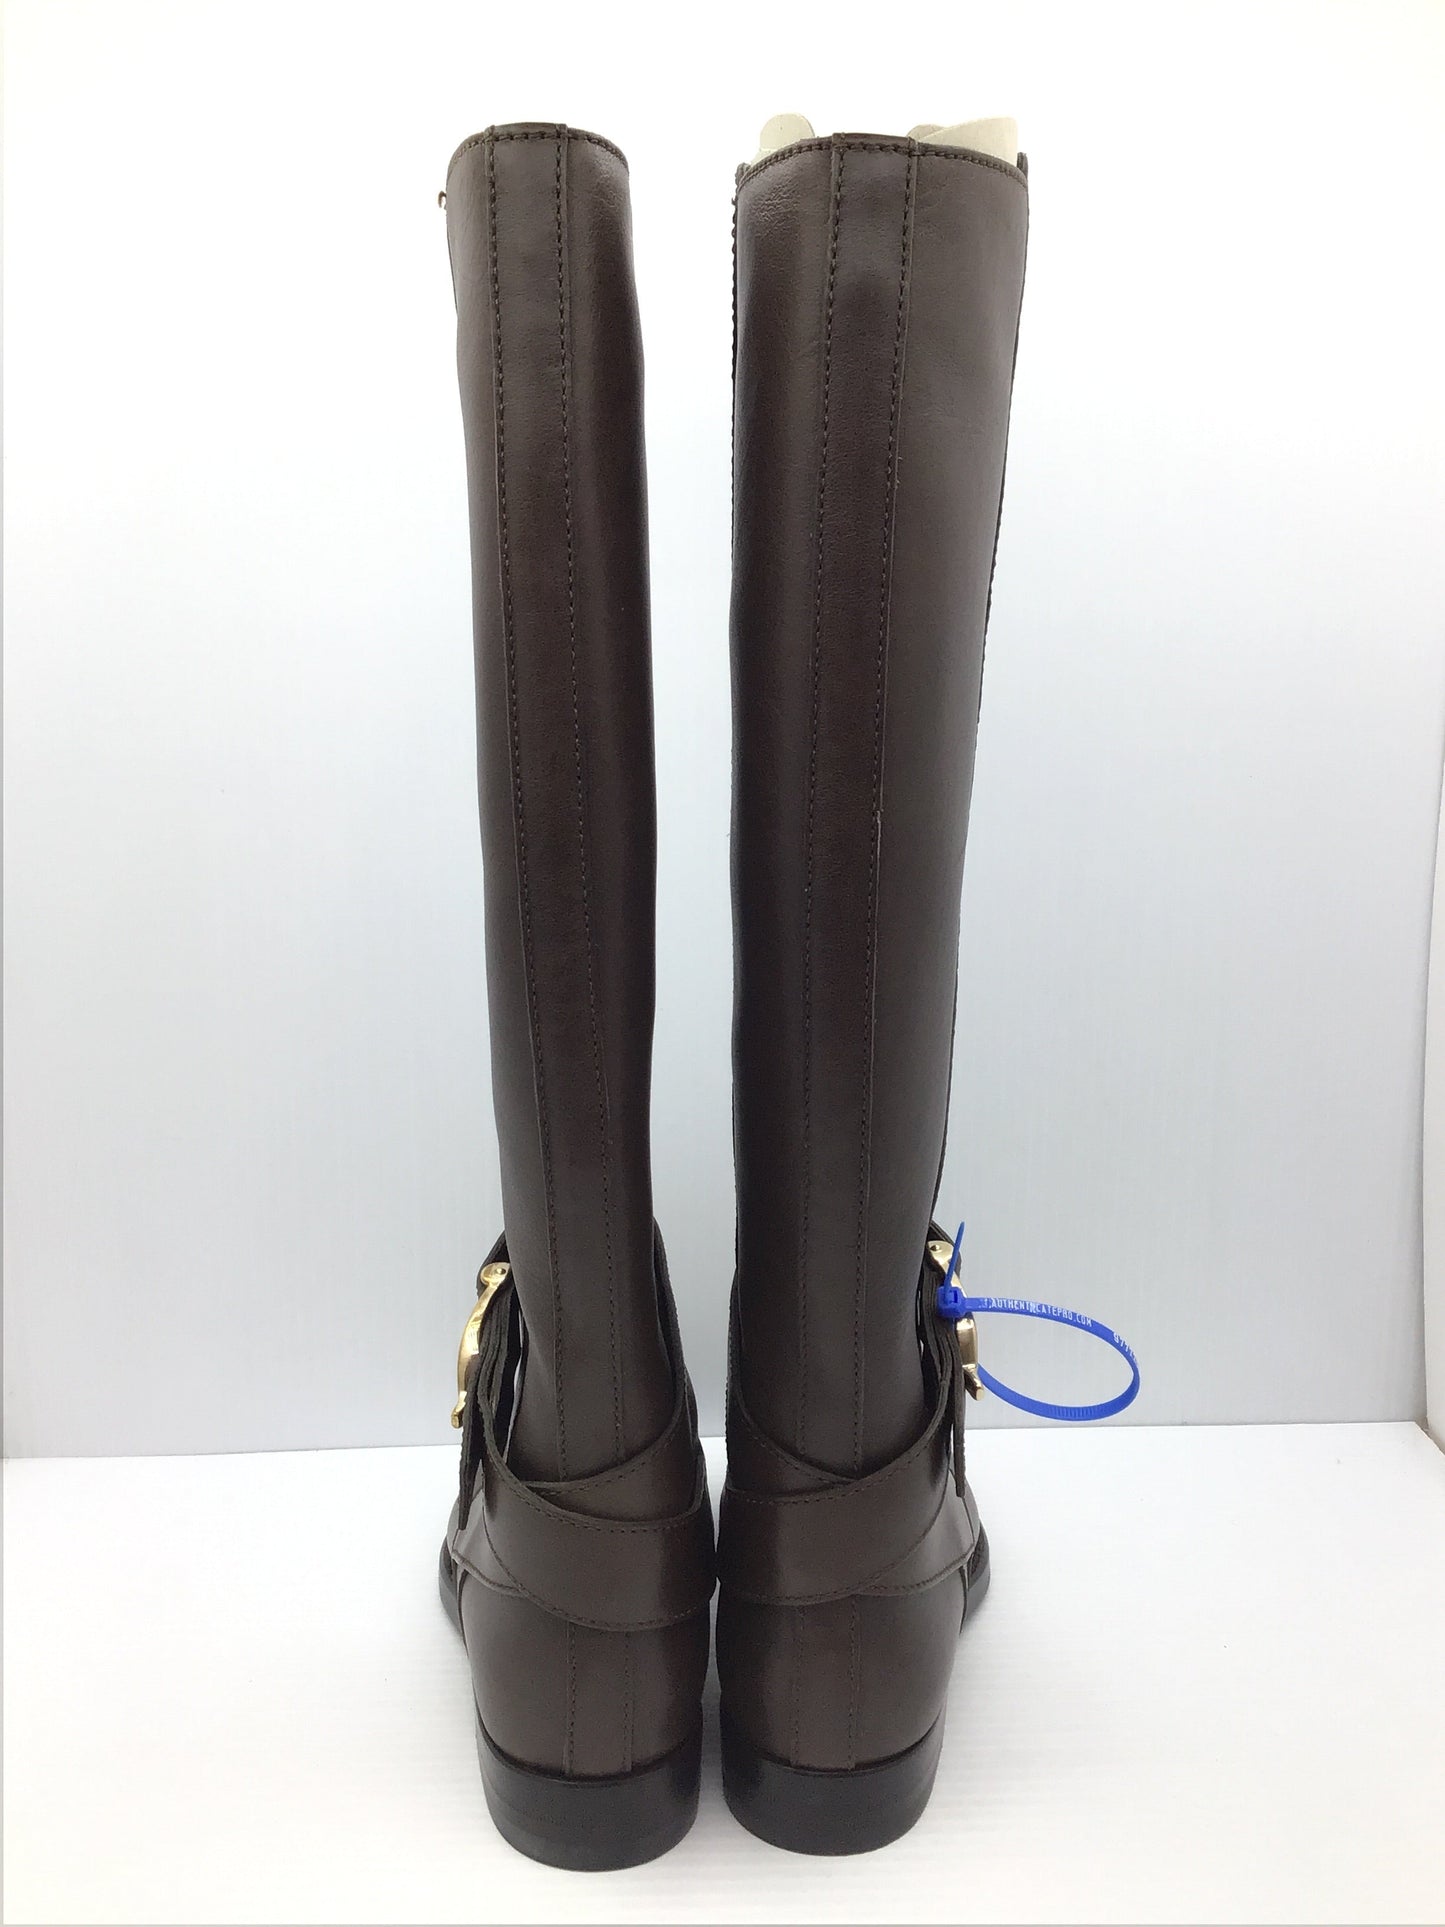 Boots Luxury Designer By Gucci  Size: 6.5